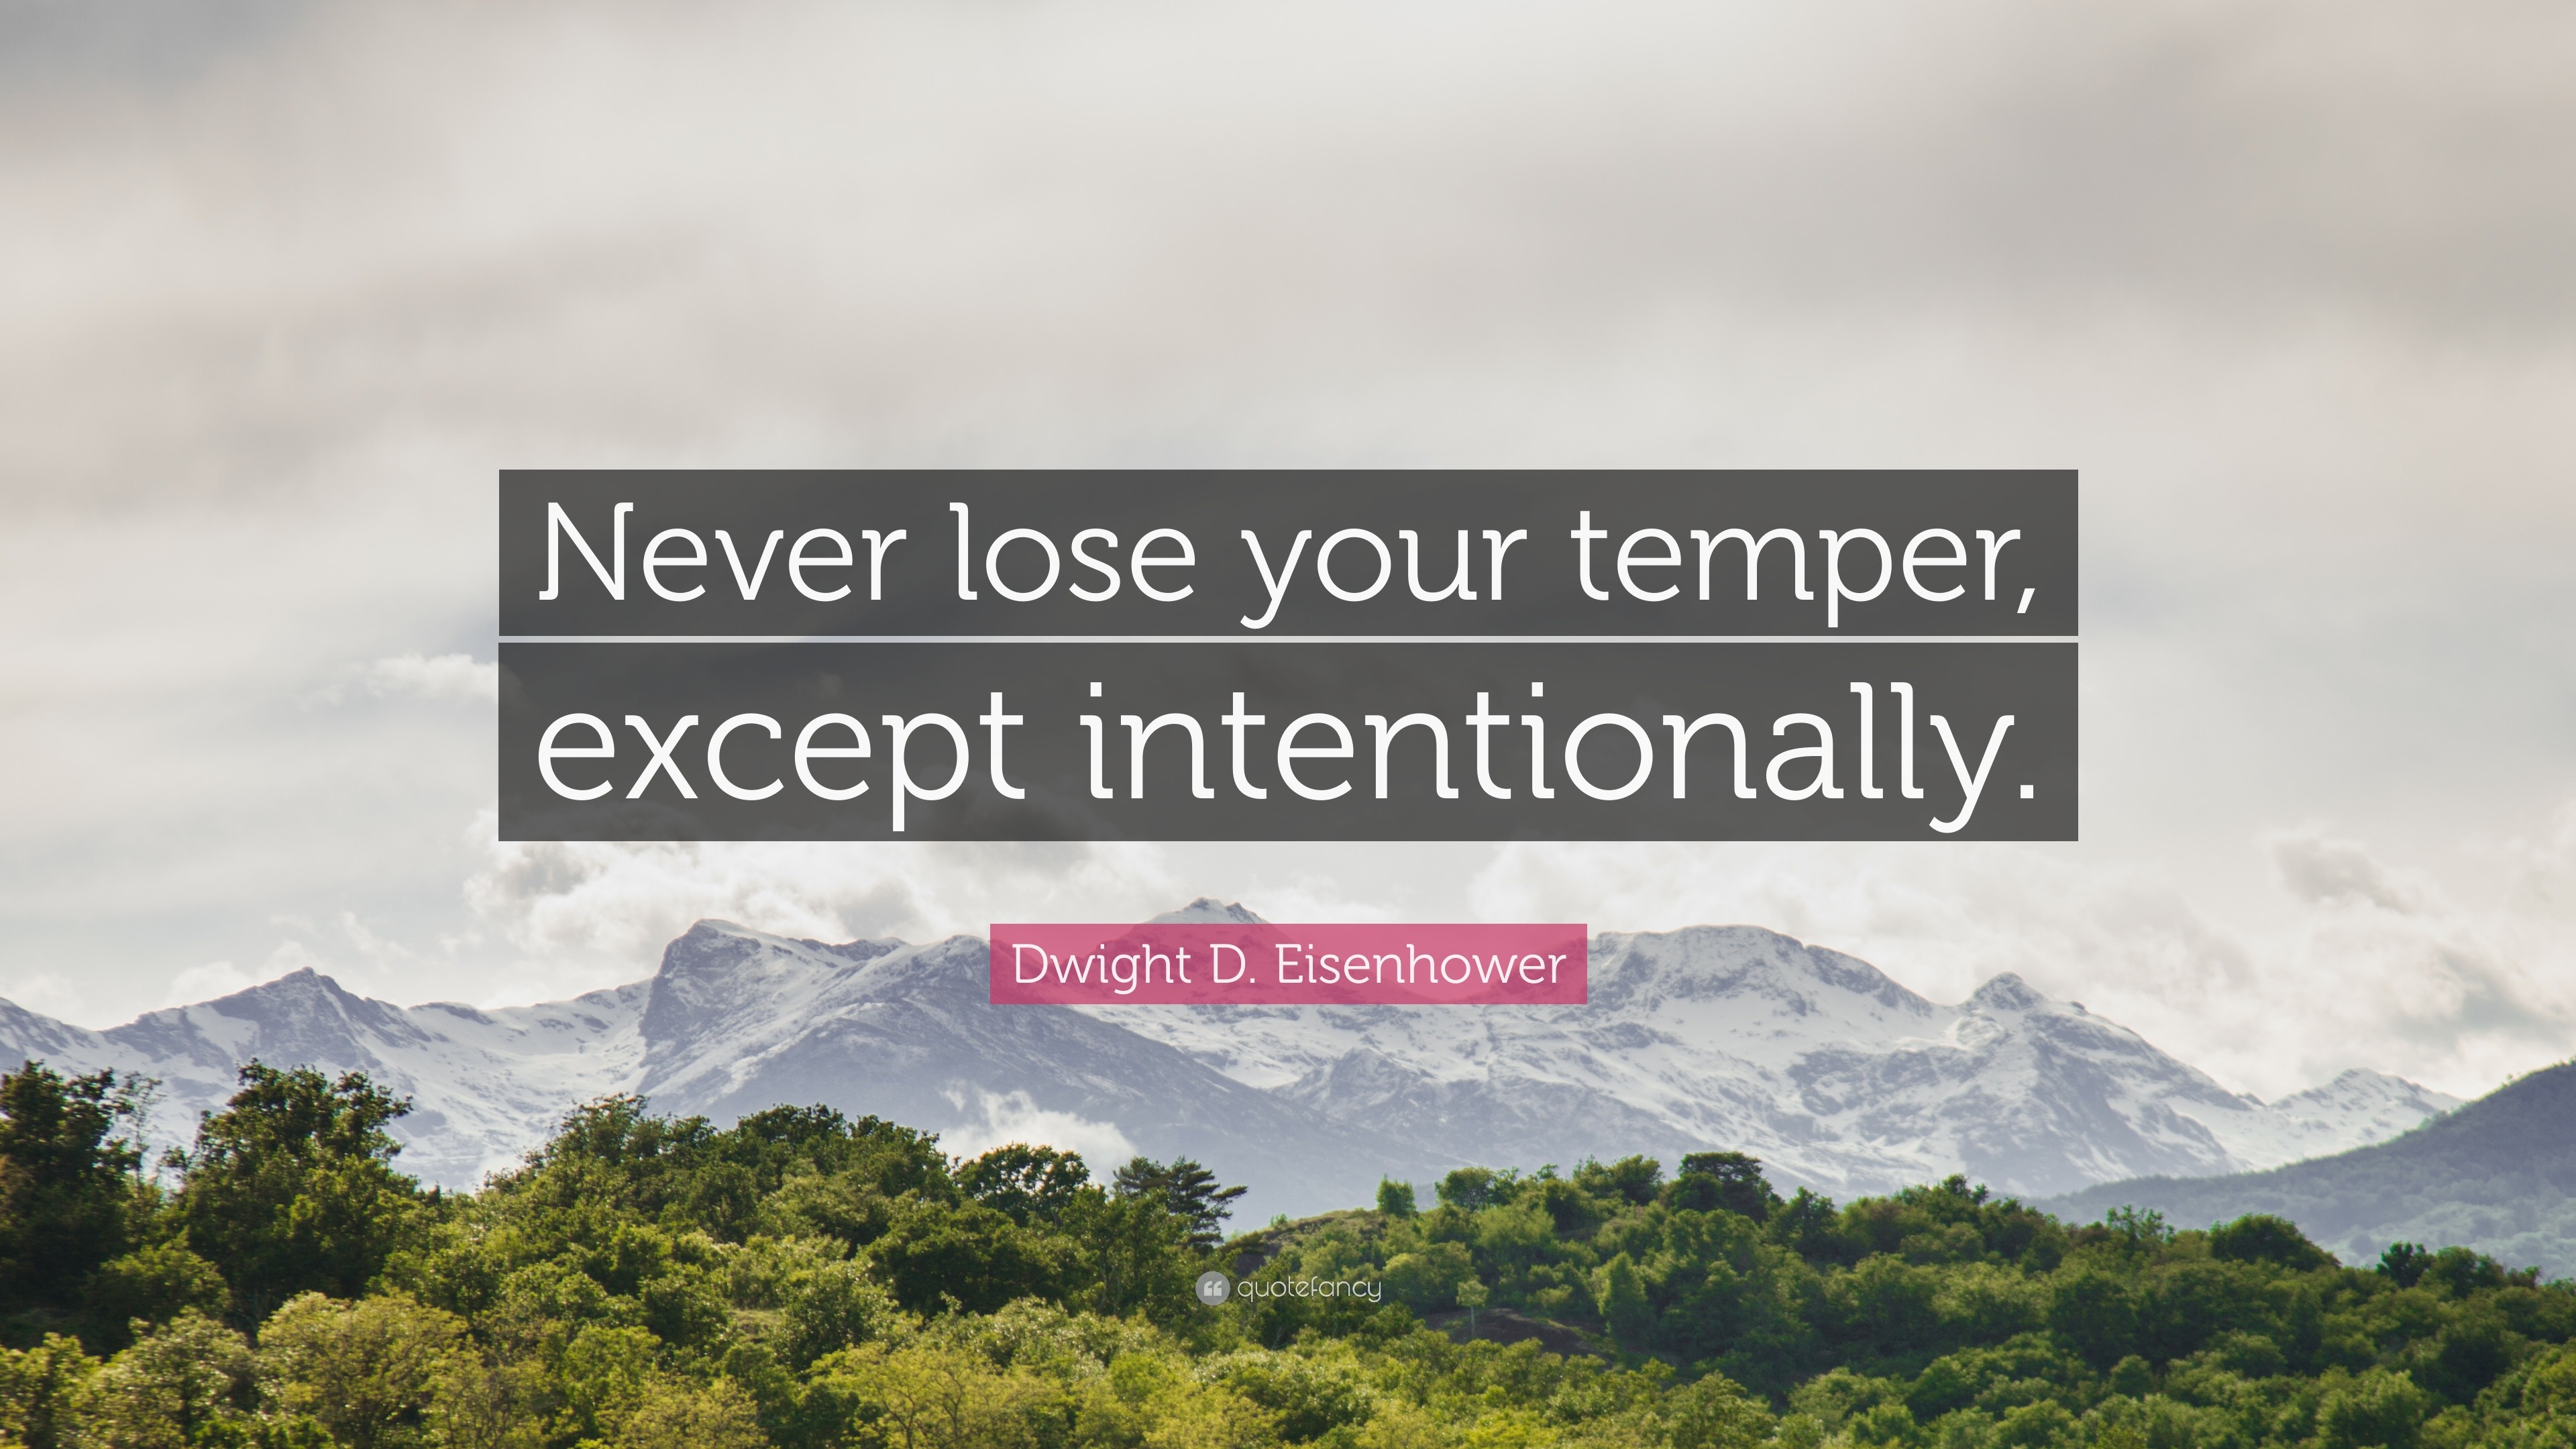 Dwight D. Eisenhower Quote: “Never Lose Your Temper, Except Intentionally.”